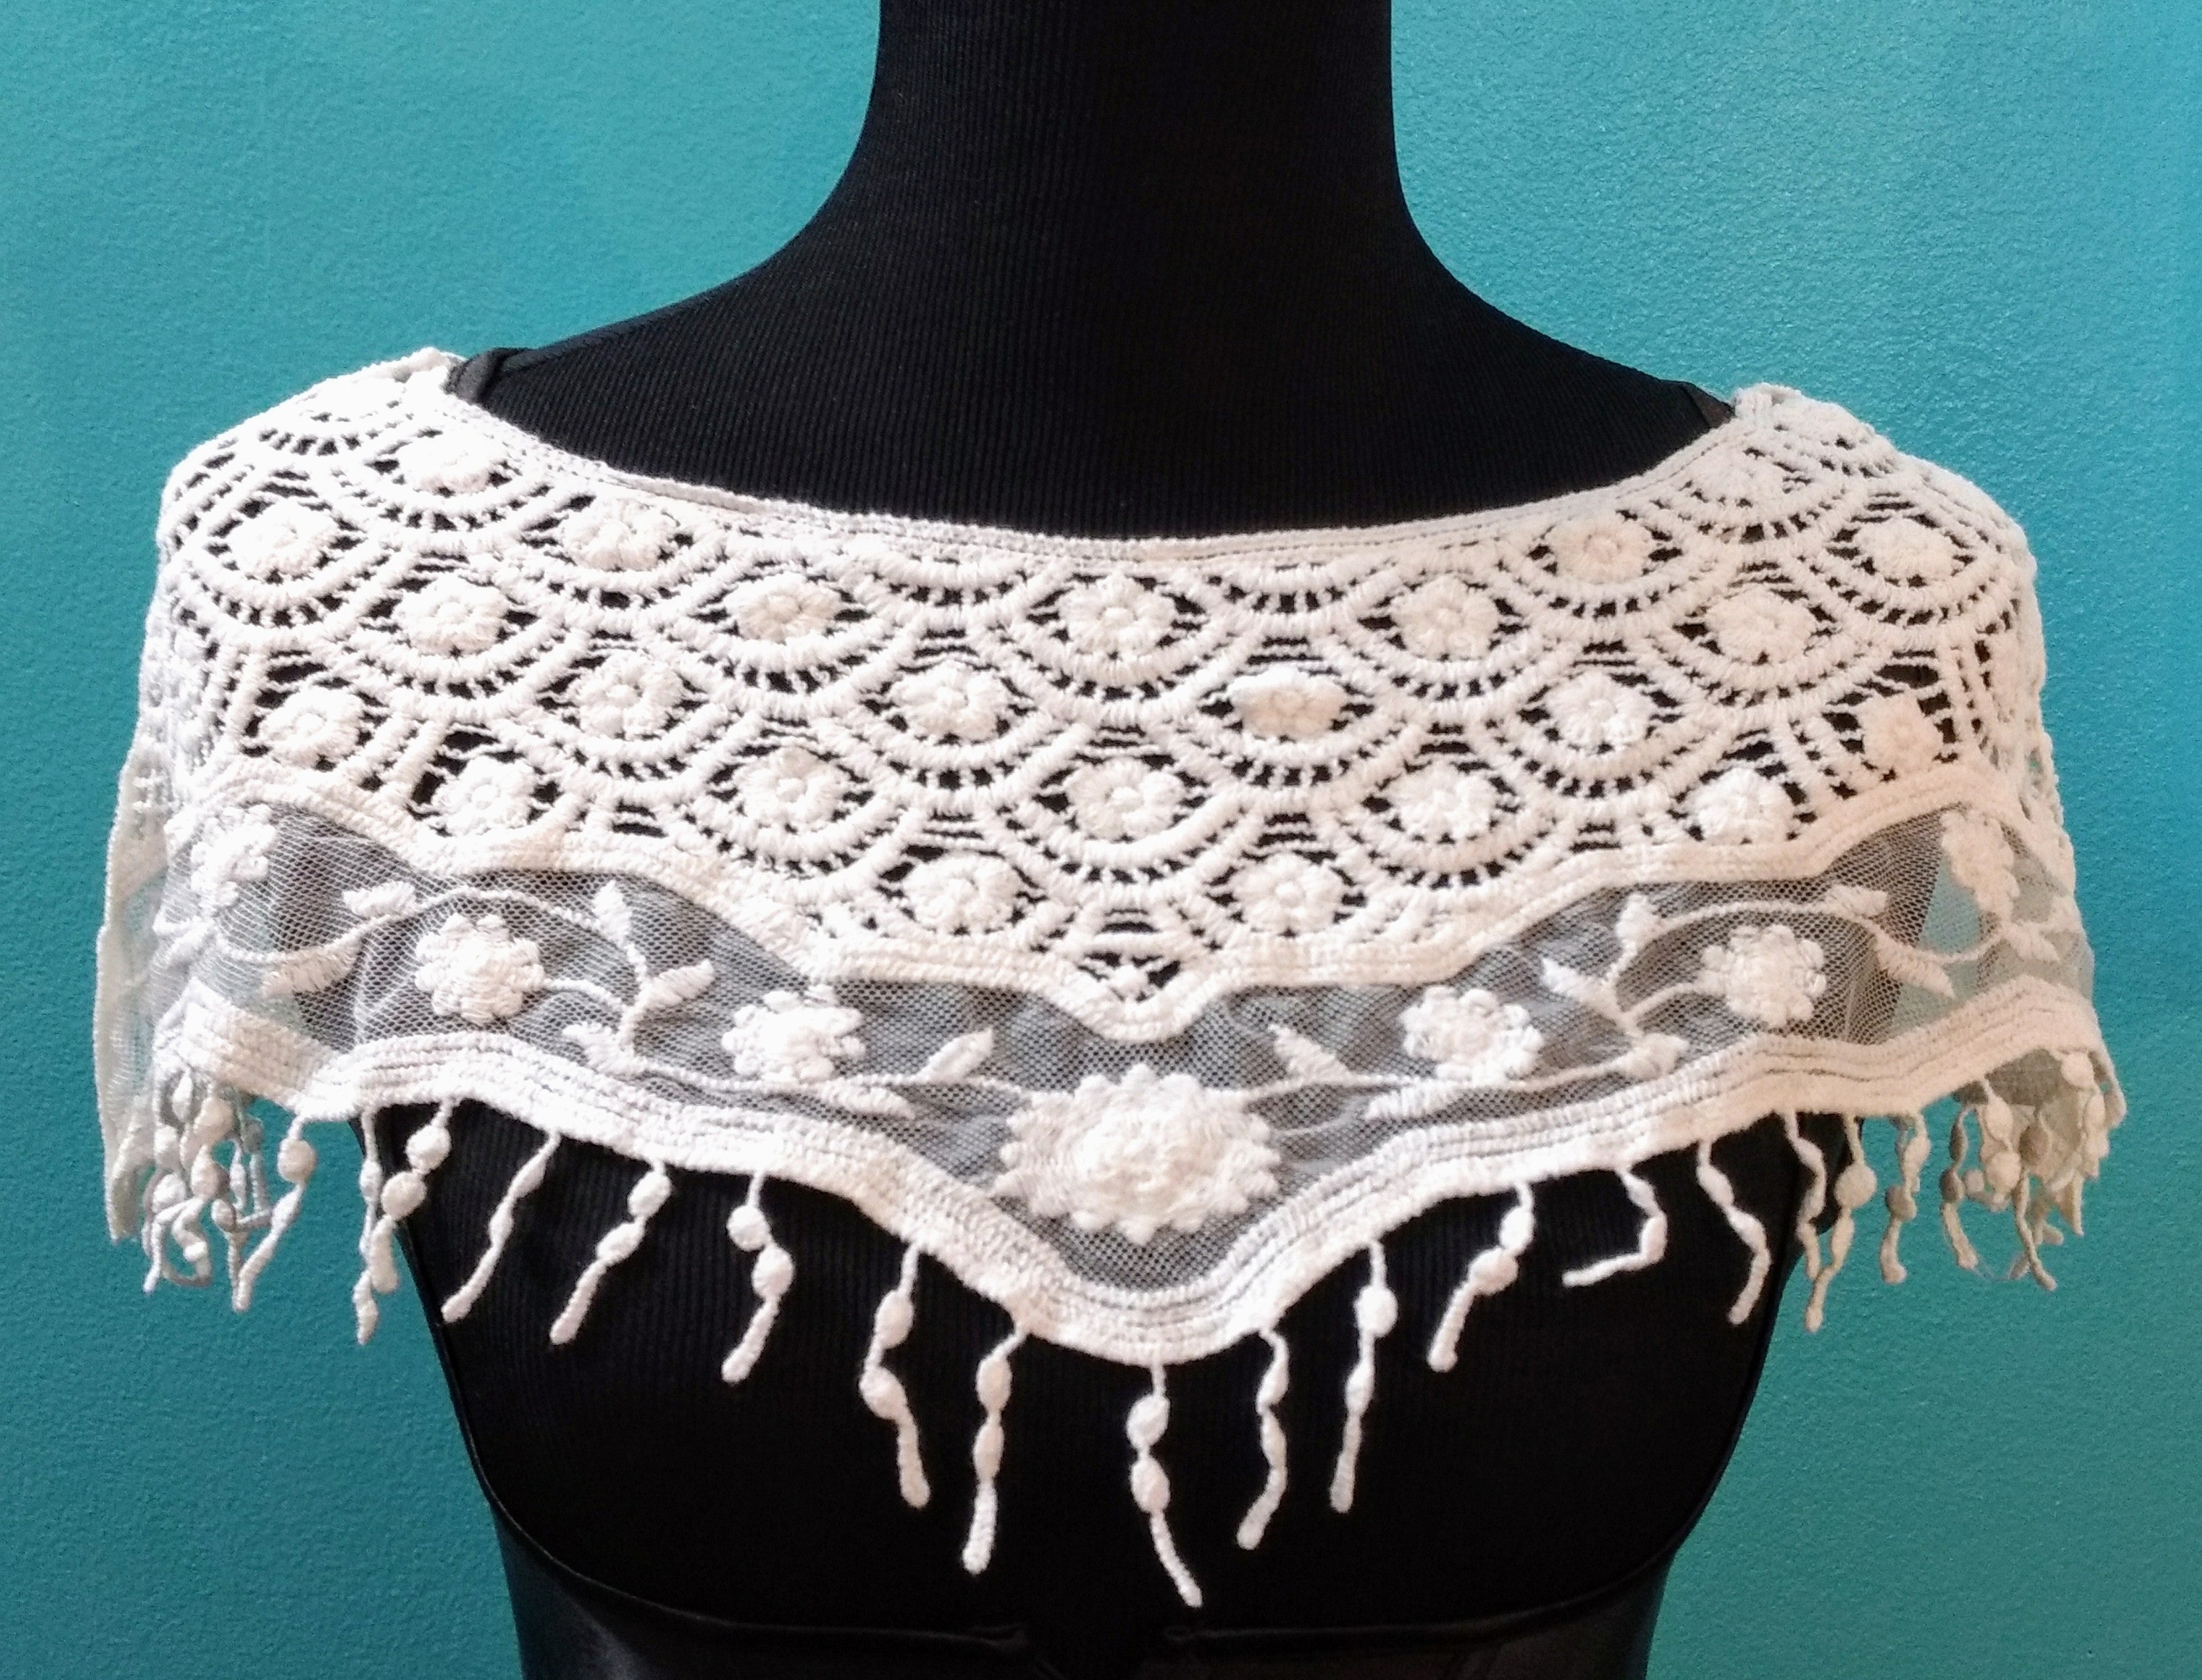 Victorian Lace & Crochet Shoulder Shrug – The Marble Faun Books & Gifts